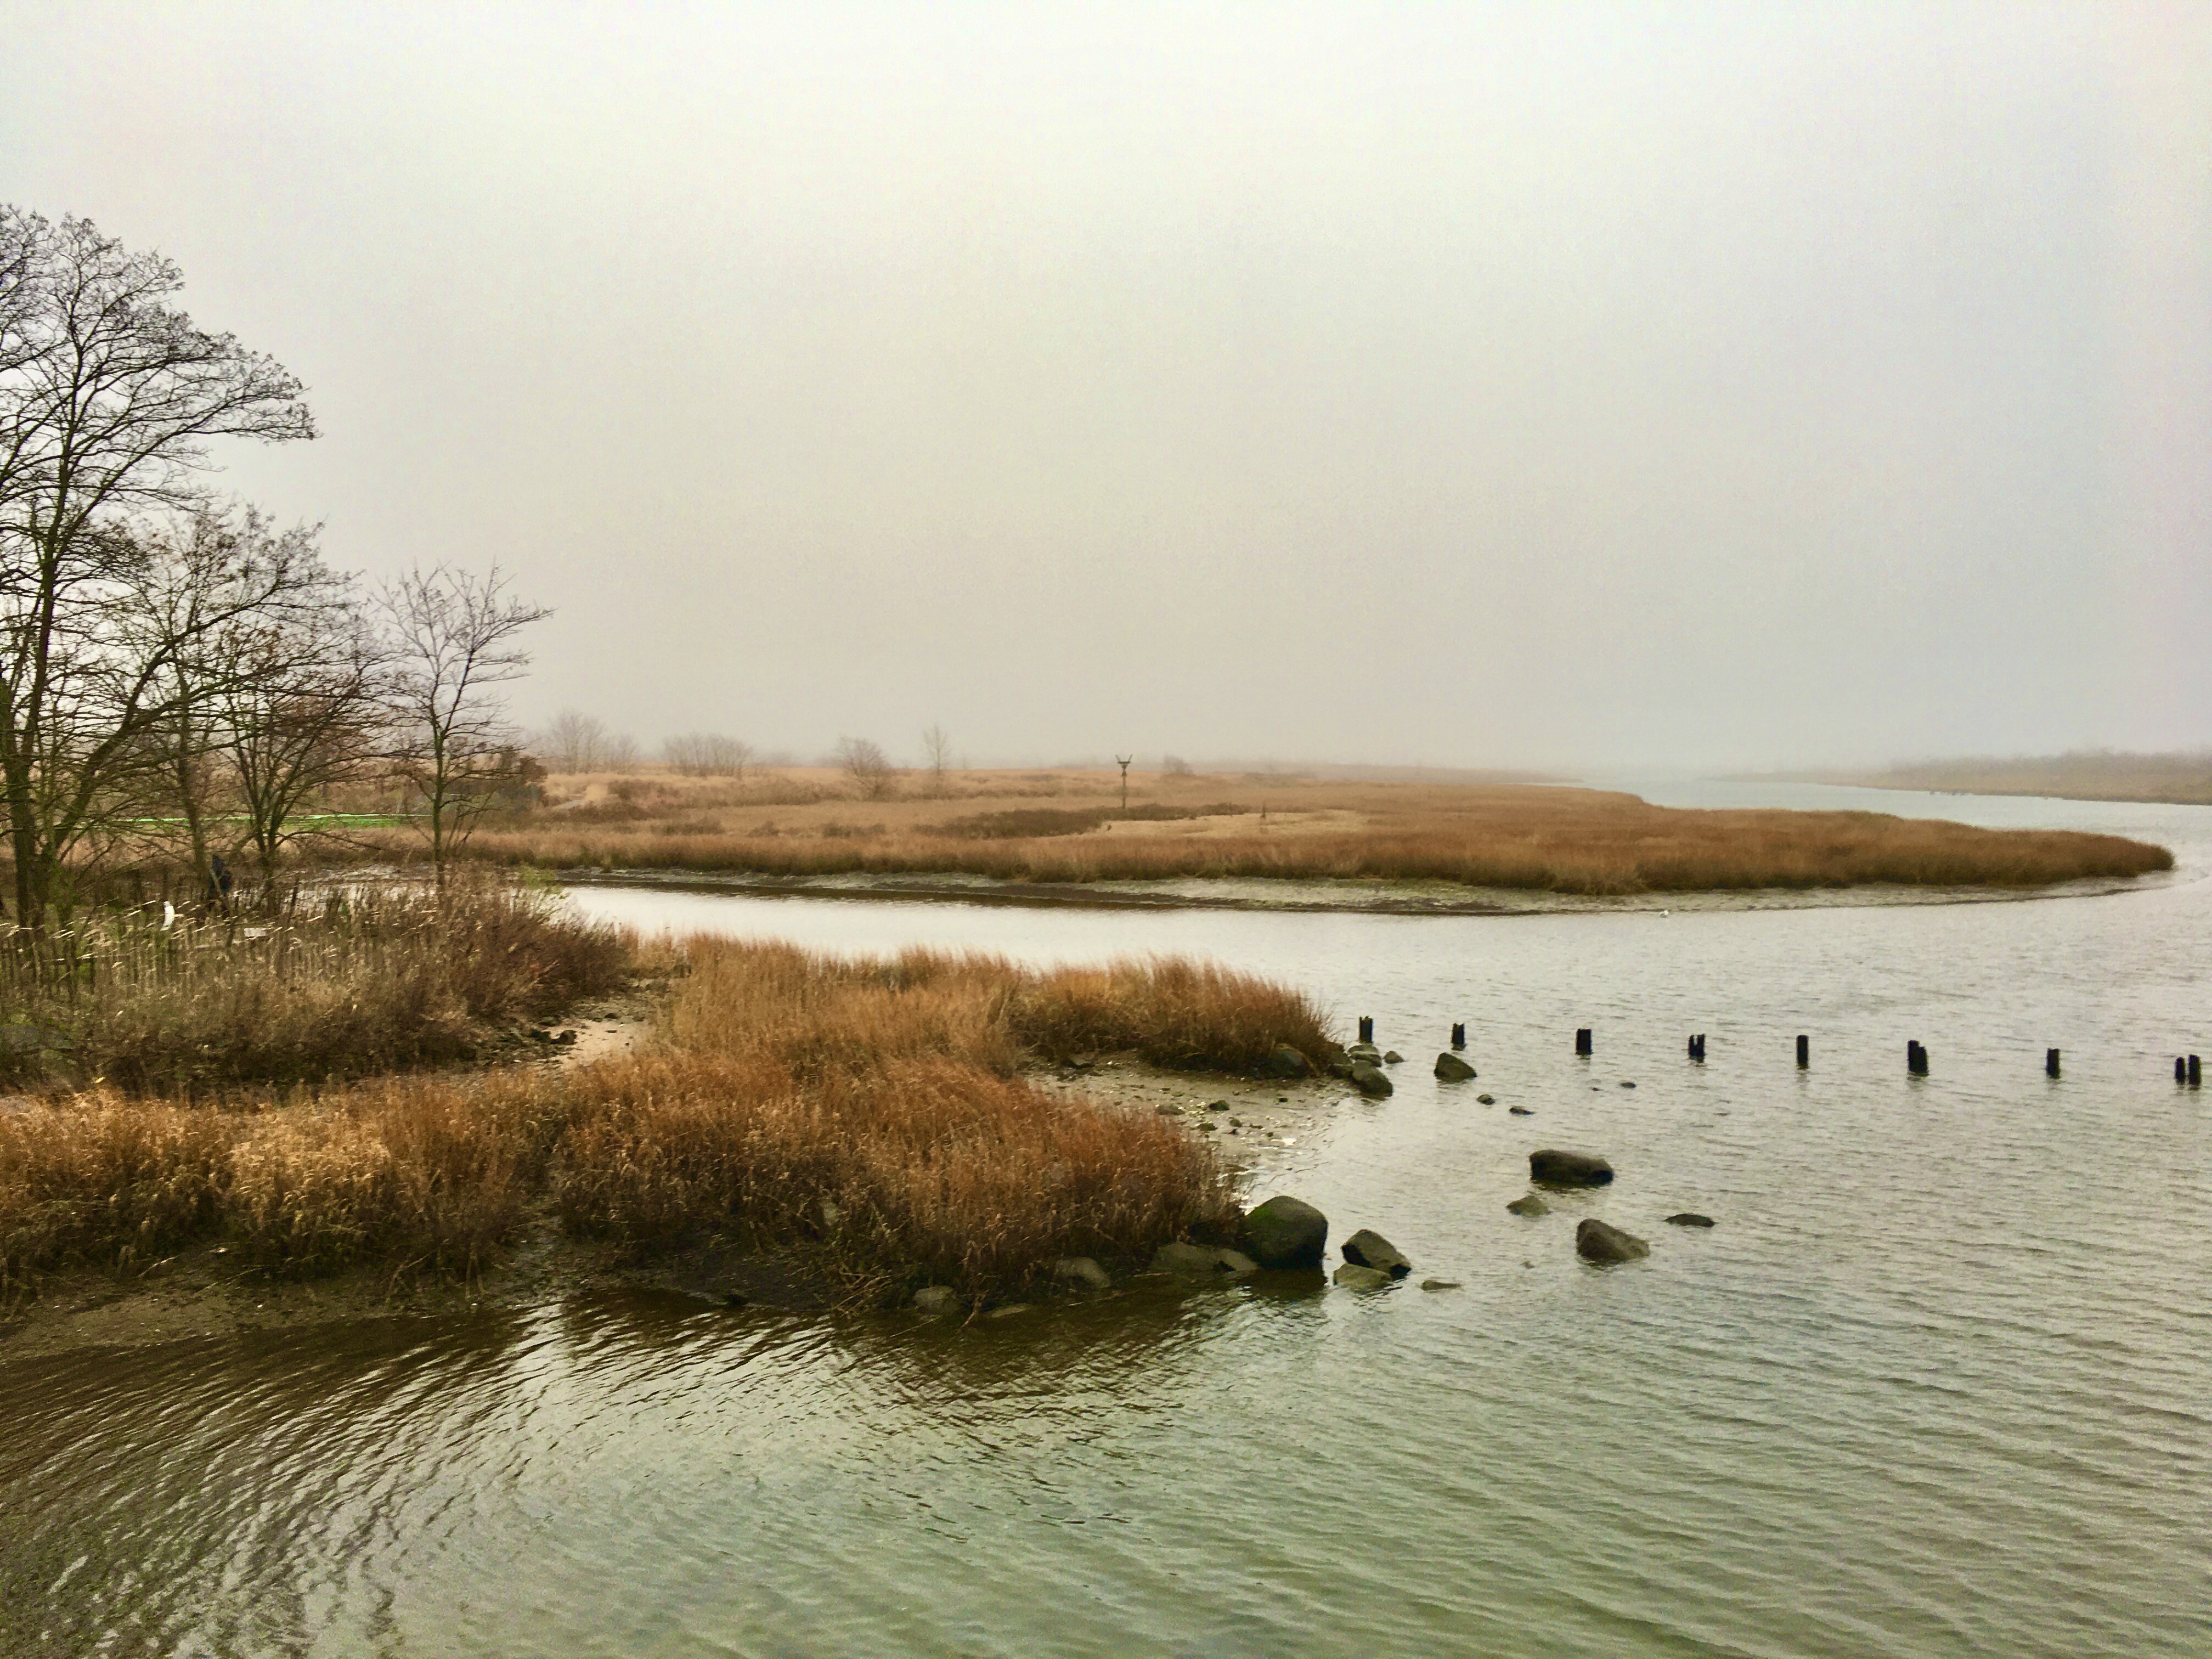 Marine Park’s nature preserve is endowed with subtle beauty in the wintertime. Photo: Lore Croghan/Brooklyn Eagle